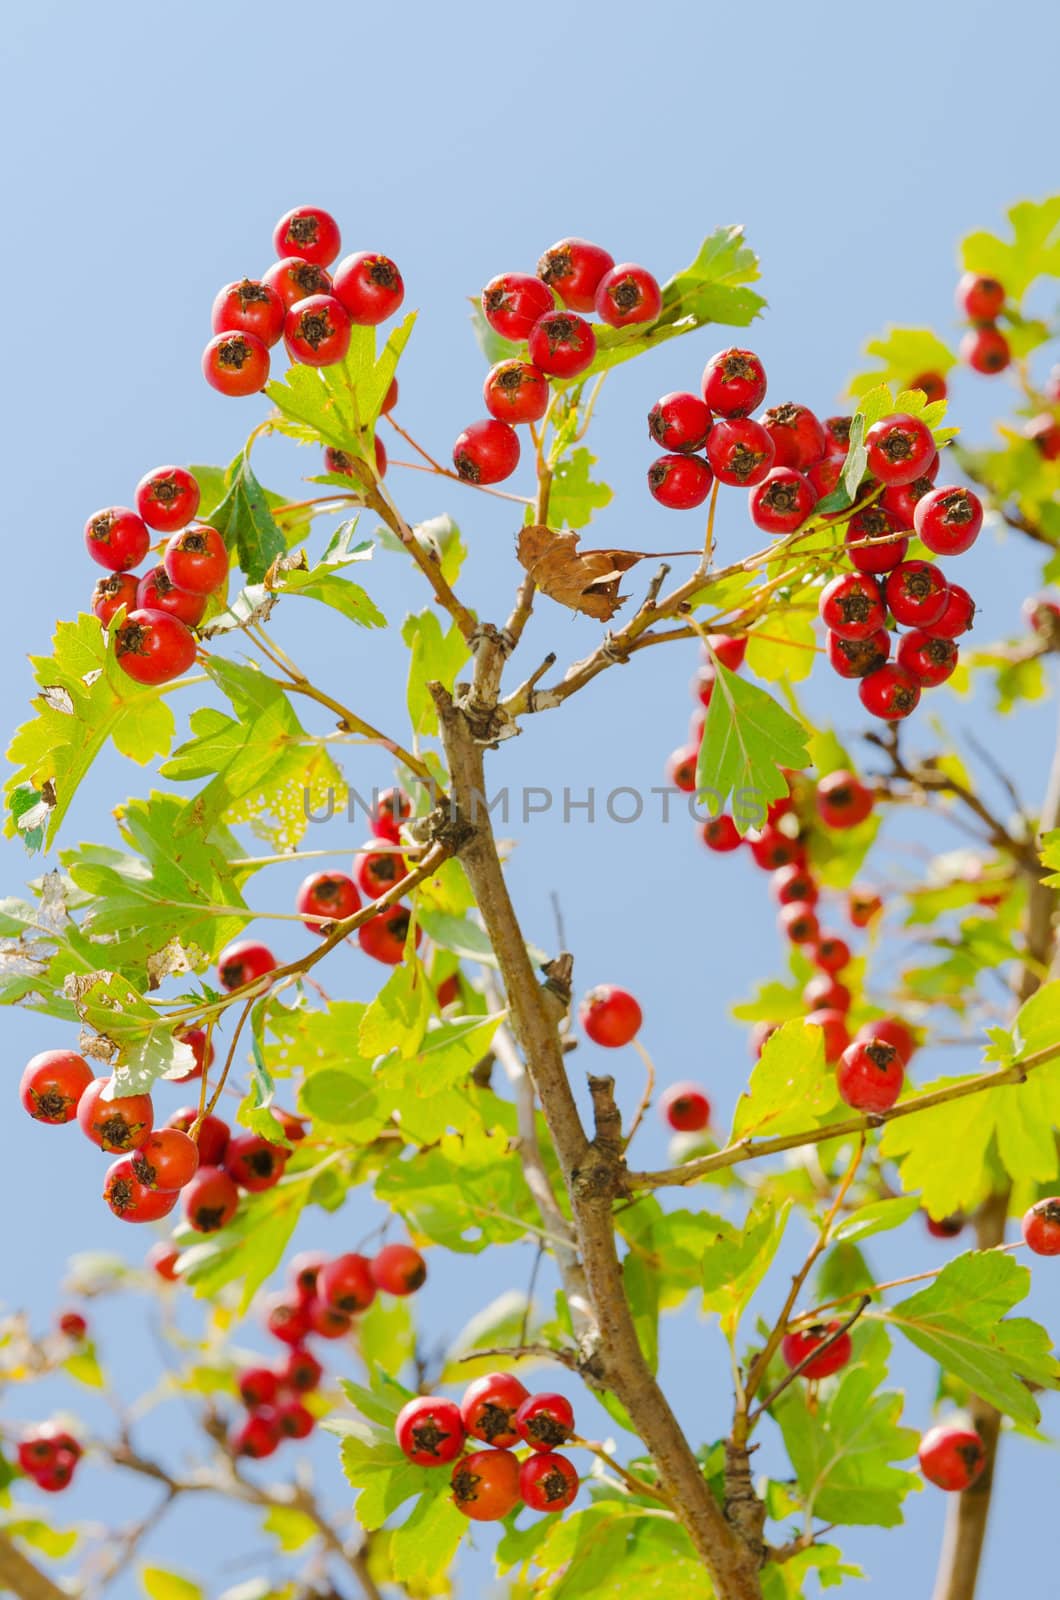 red vitaminic healthy berry on a branch. mature food